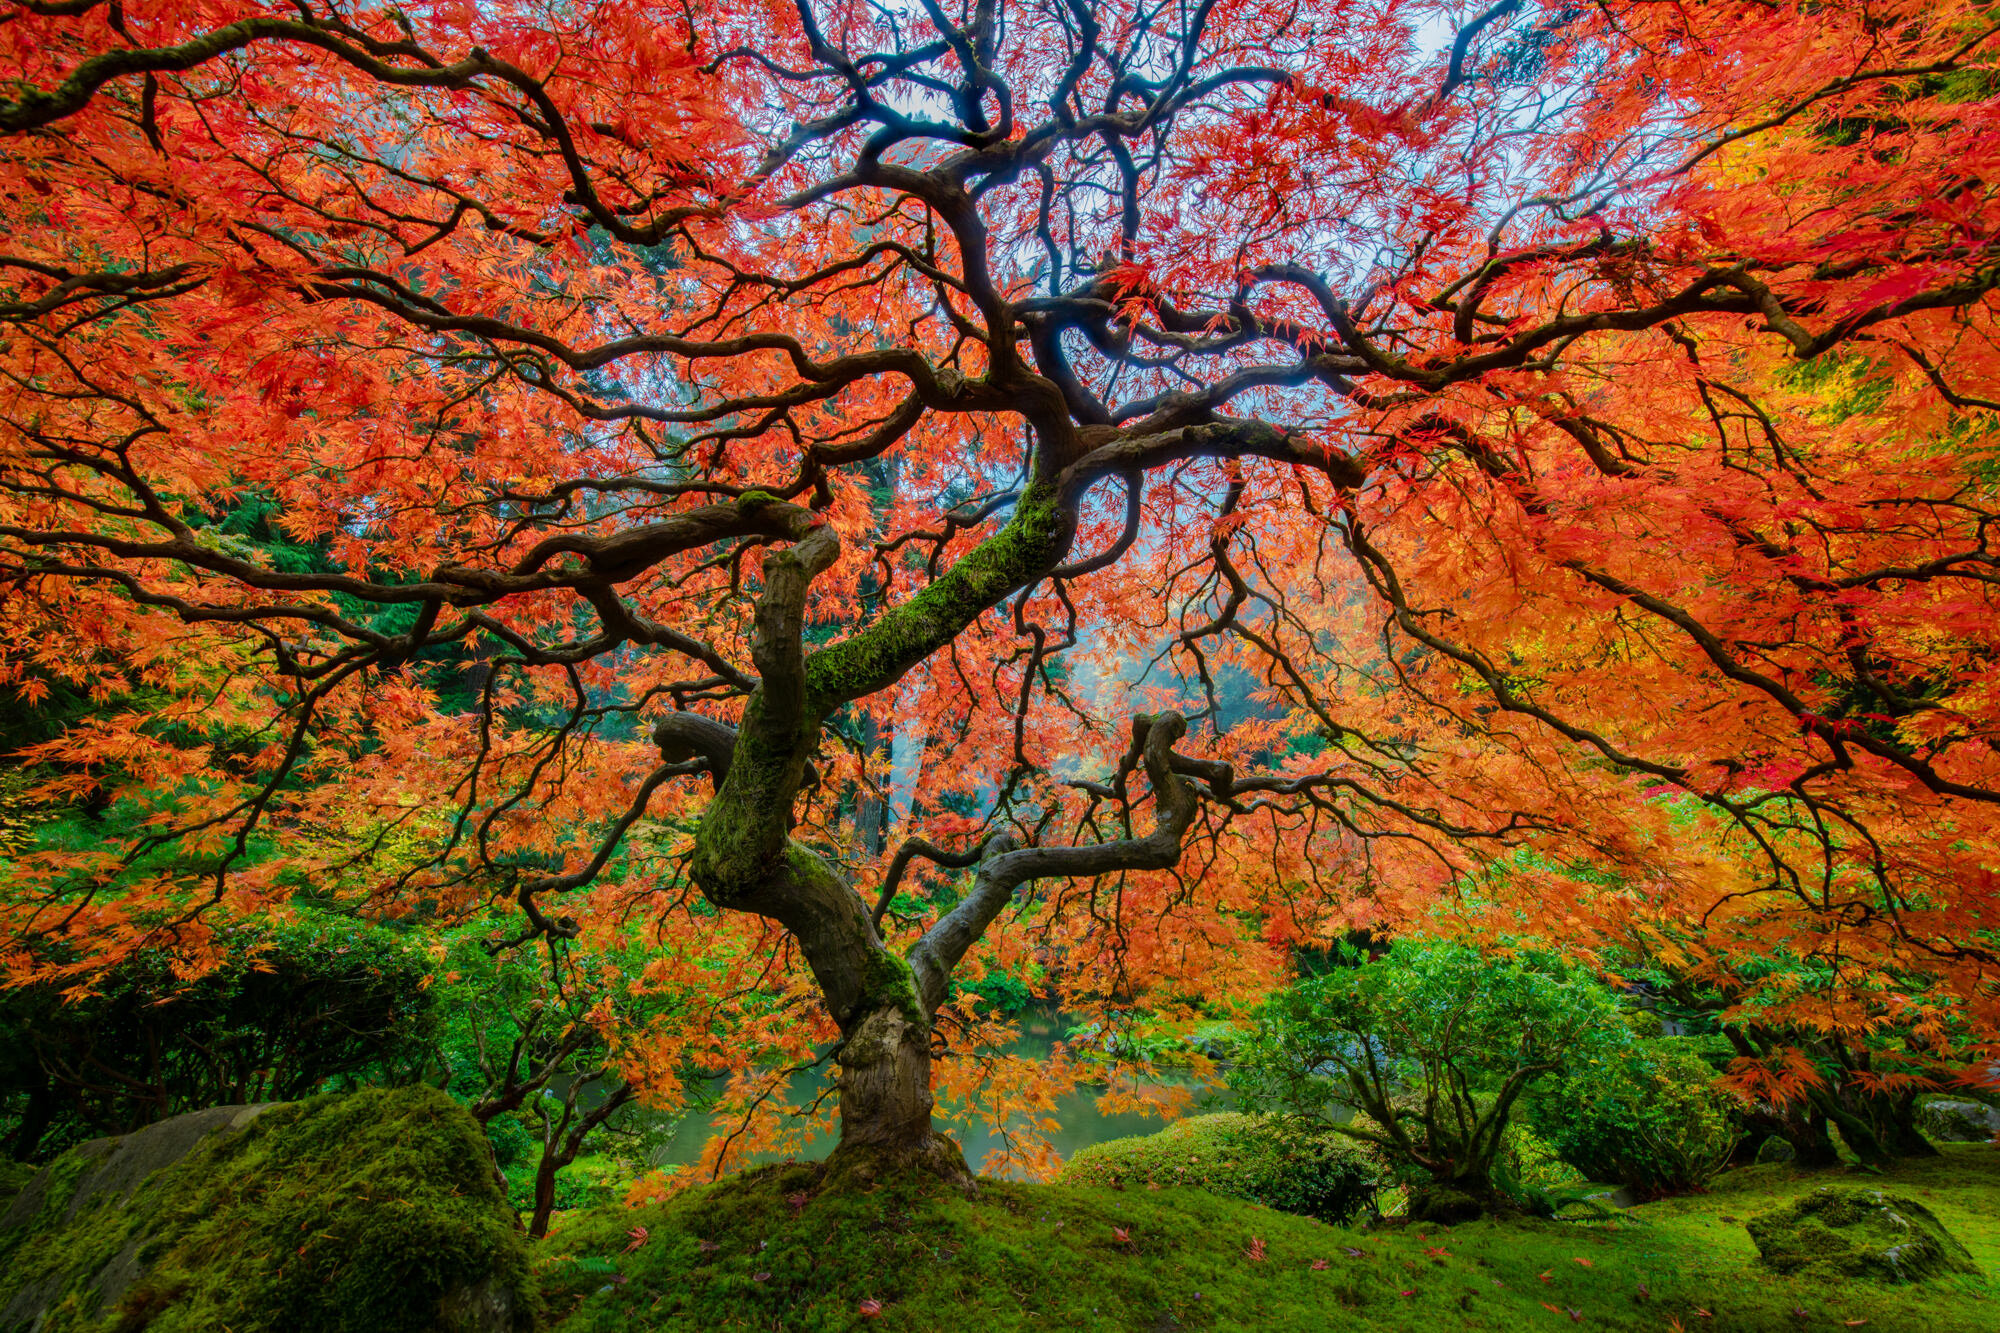 A Japanese Maple in Autumn with beautifully vibrant red leaves at the Portland Japanese Garden | Photo Title: Dreamcatcher | Photo by Chris Byrne ©2020